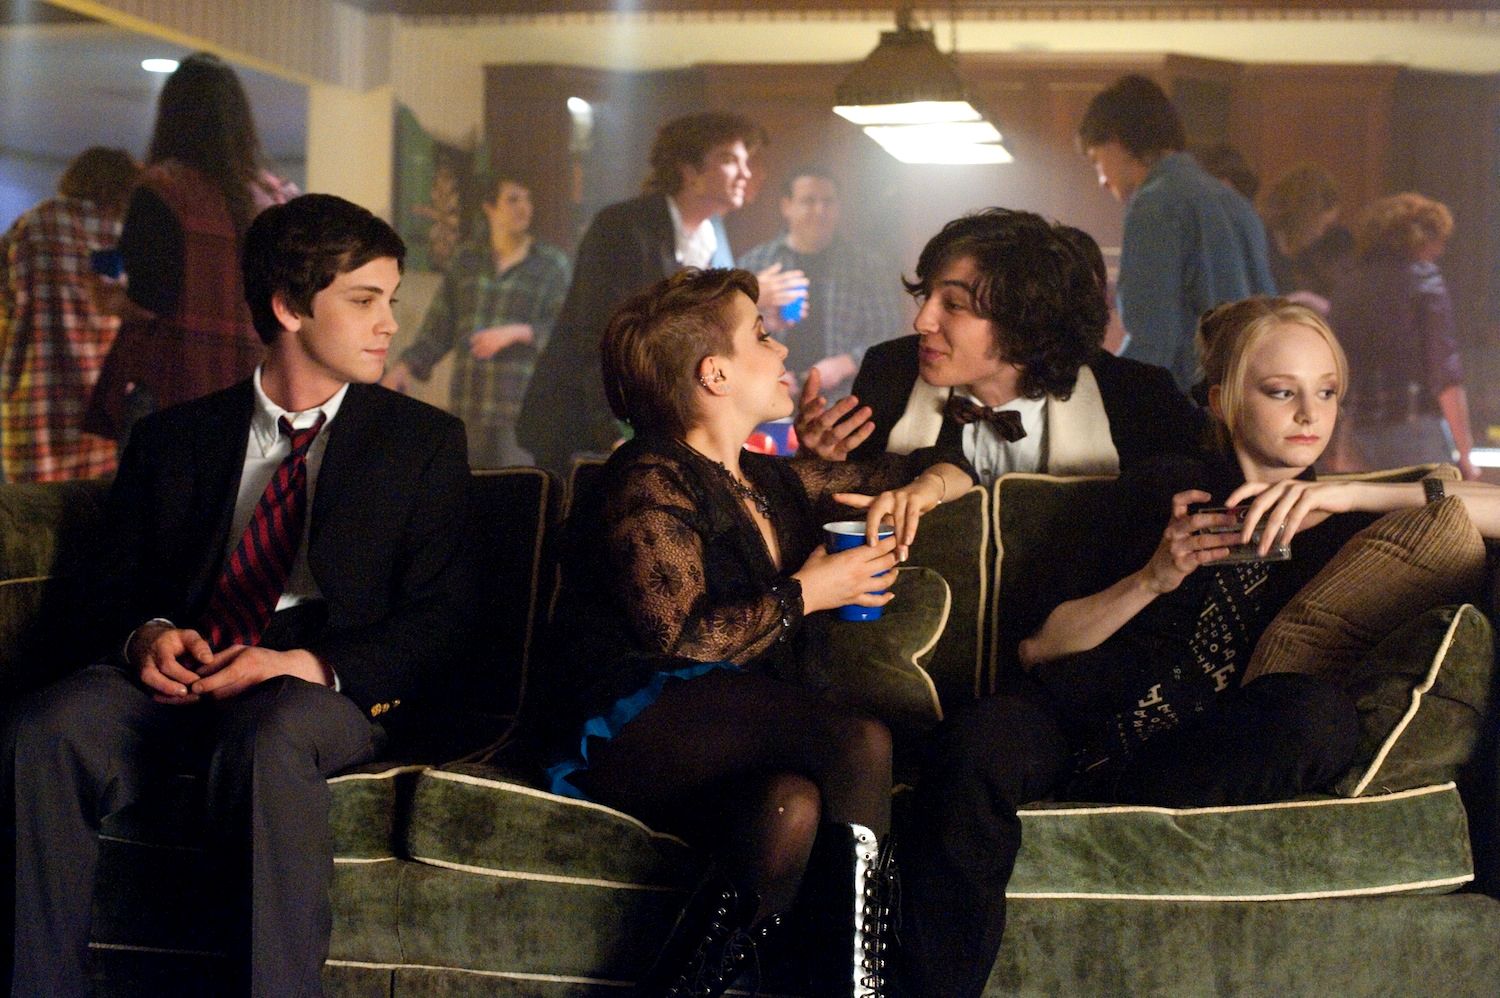 Charlie sits on the couch to the left of Patrick, Mary Elizabeth, and, Alice, unincluded in the conversation, in 'The Perks of Being a Wallflower' (2012).